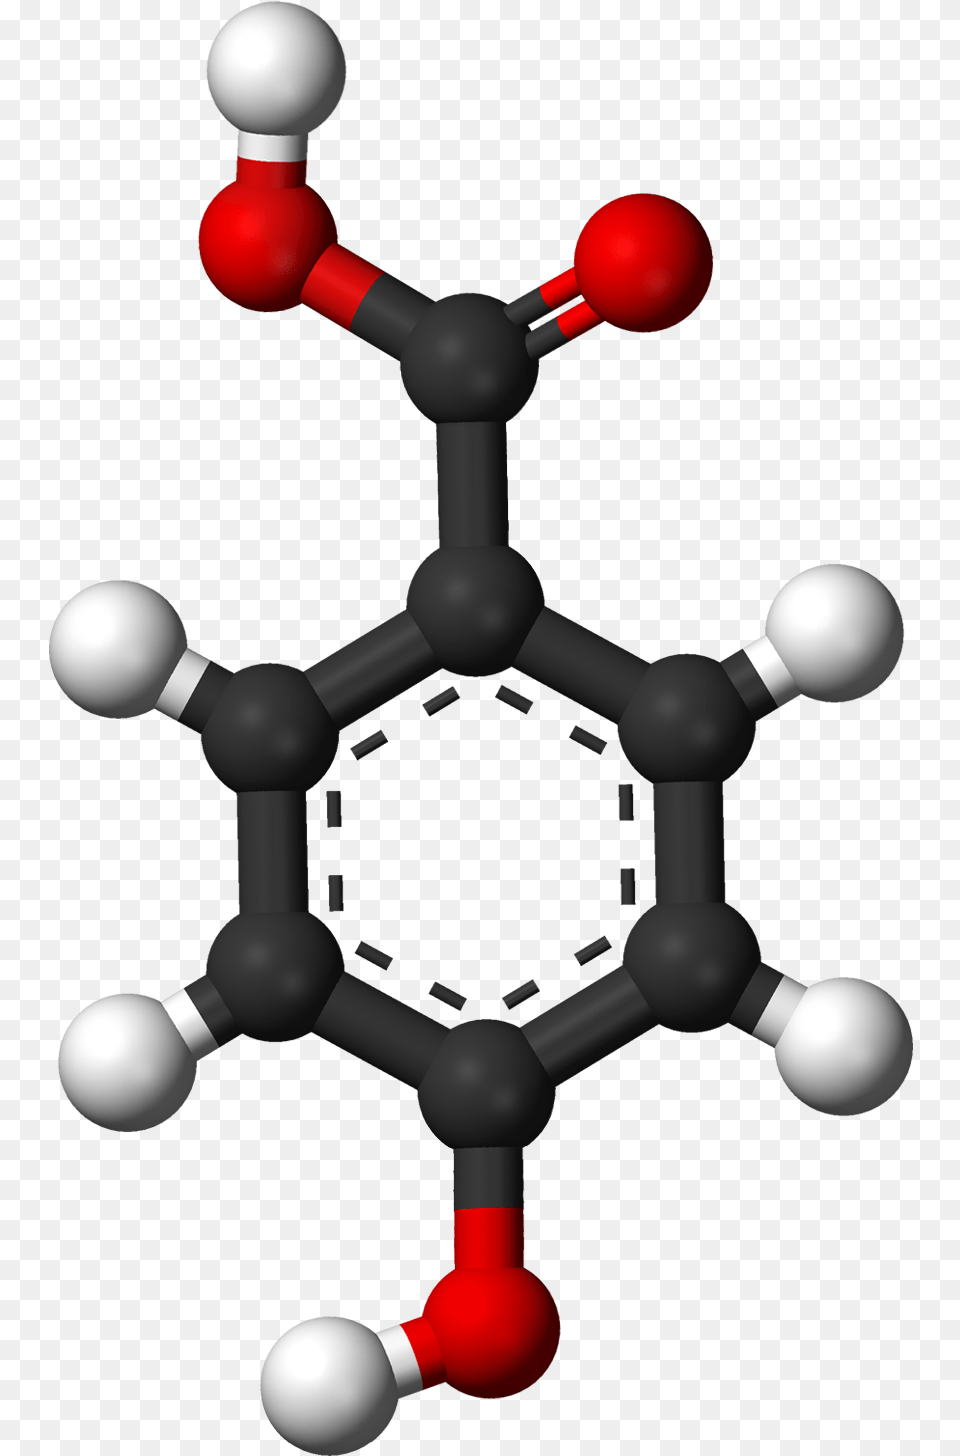 Hydroxybenzoic Ac Salicylic Acid Ball And Stick, Sphere, Chess, Game Png